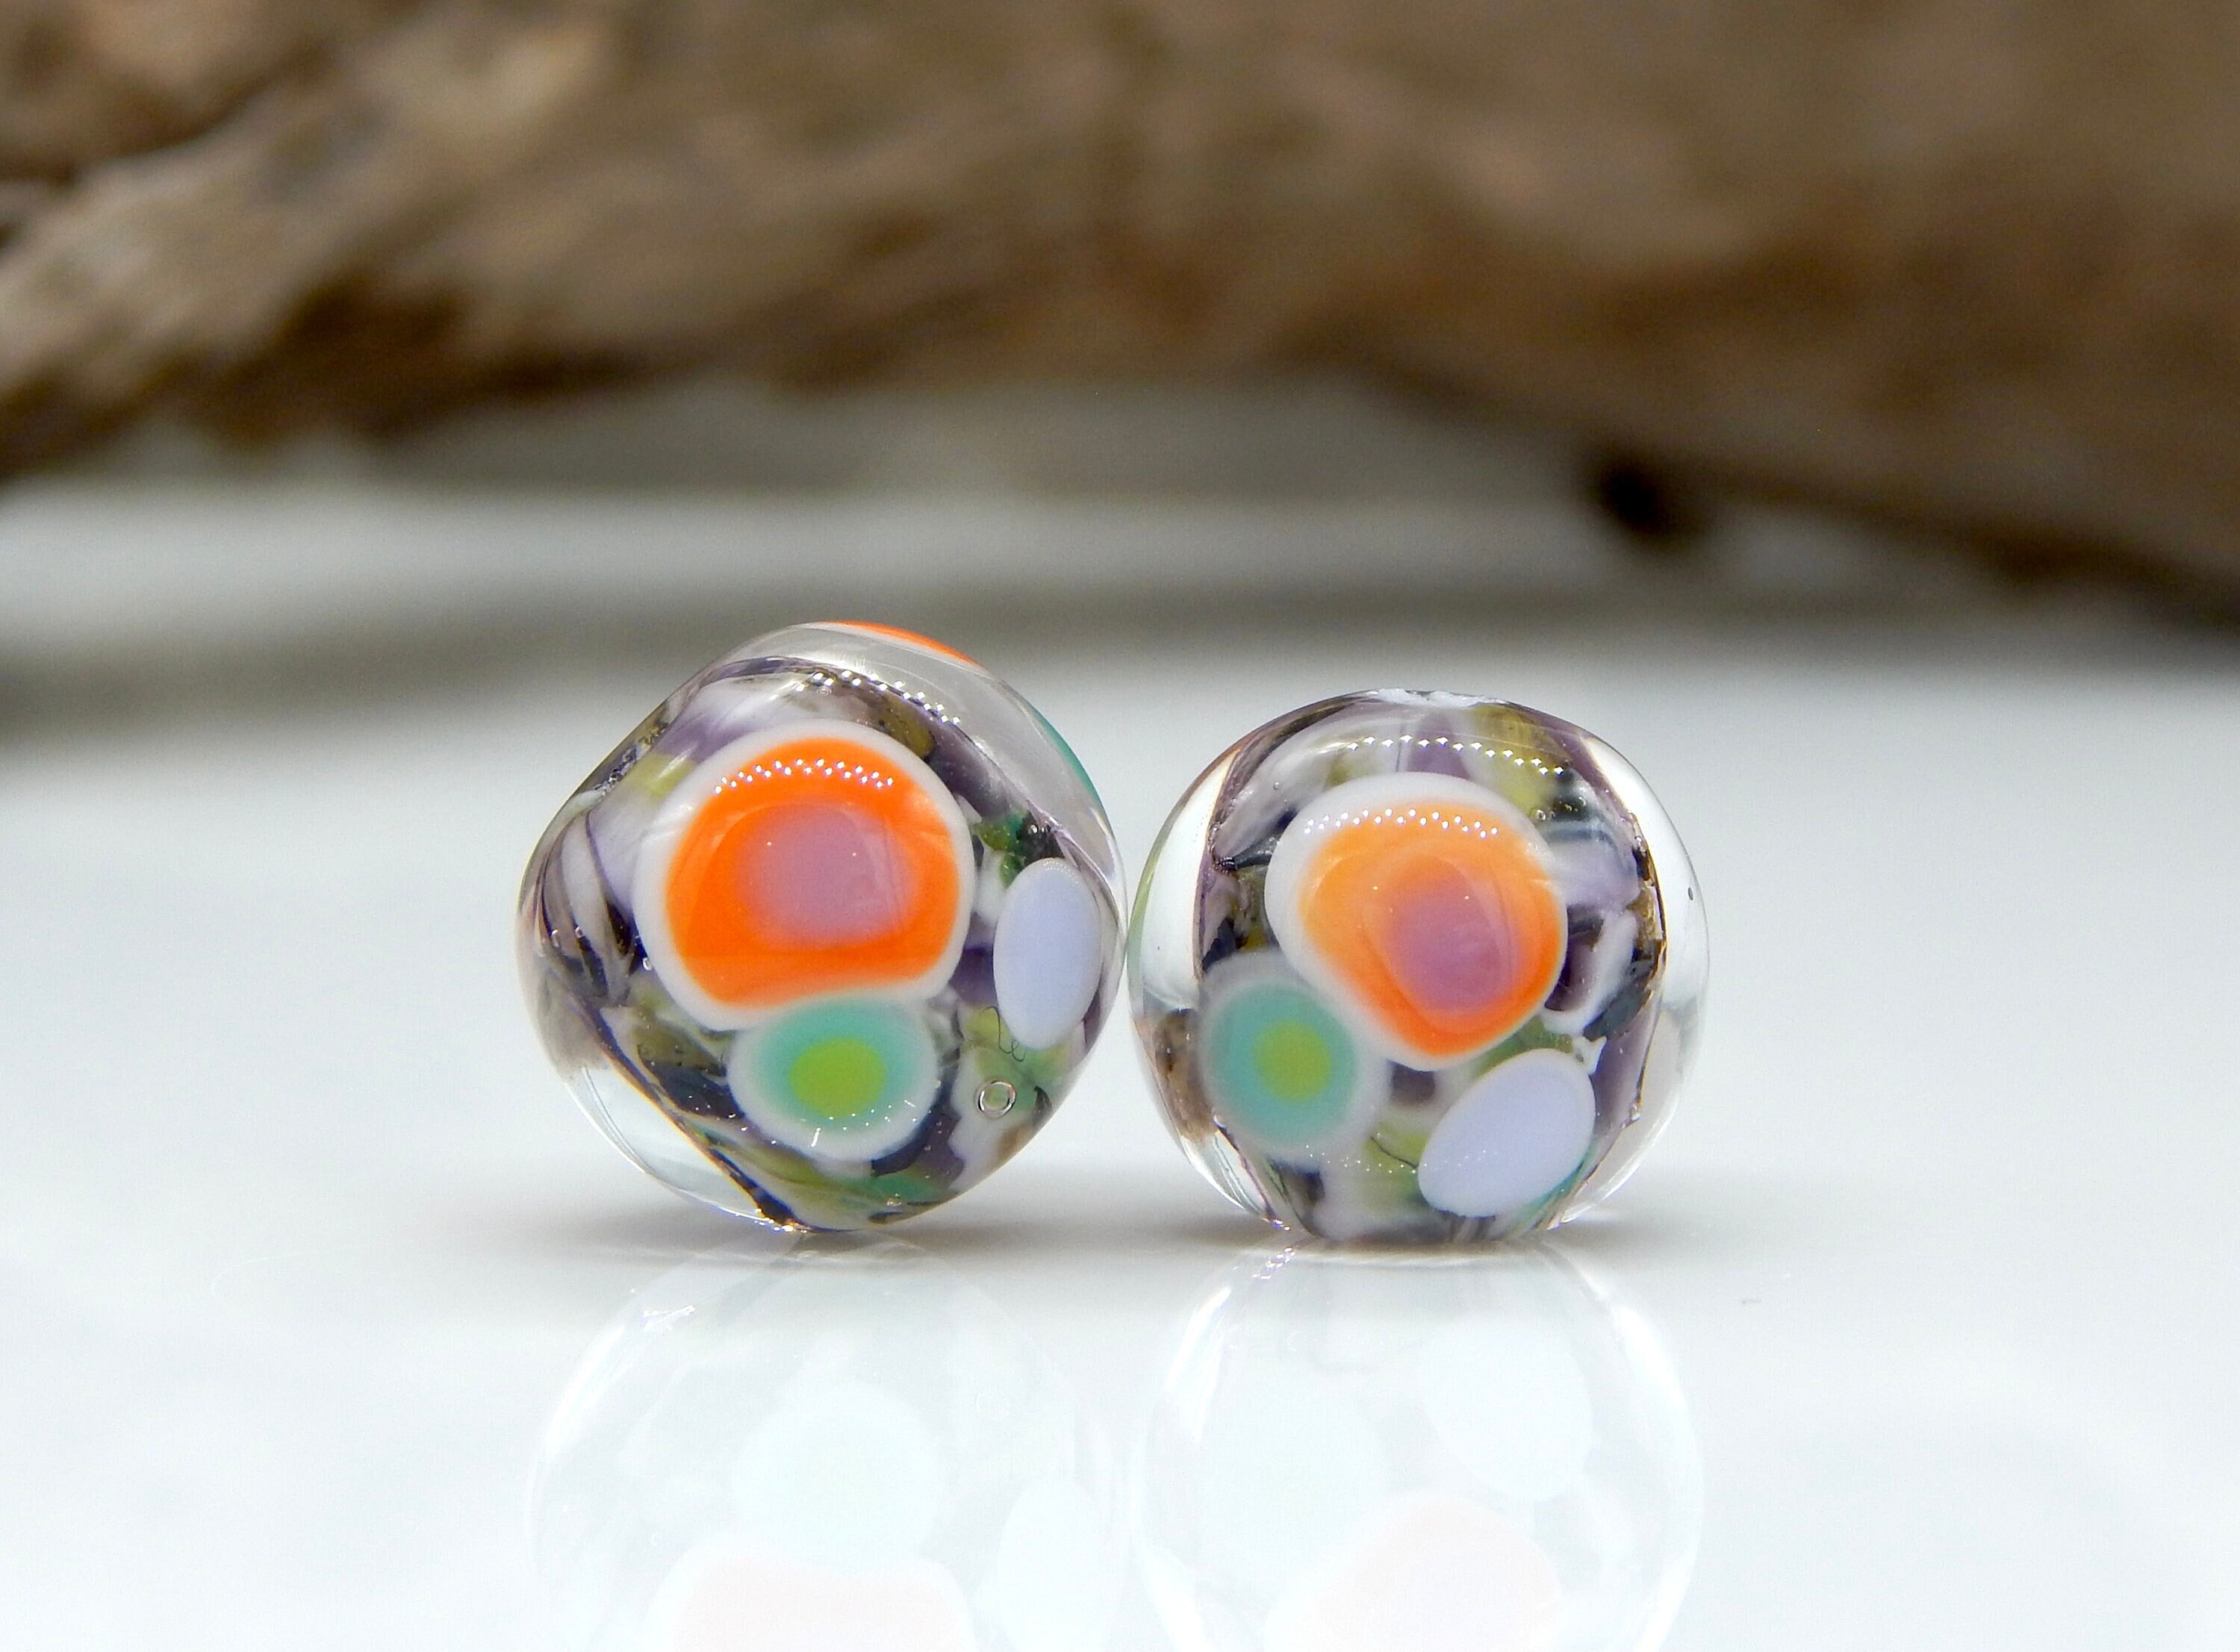 PAIRS 262 Lampwork Bead Pair Handmade Orange Green Black Halloween Colors  FLOWERS Matched beads Perfect for Accents and Earrings